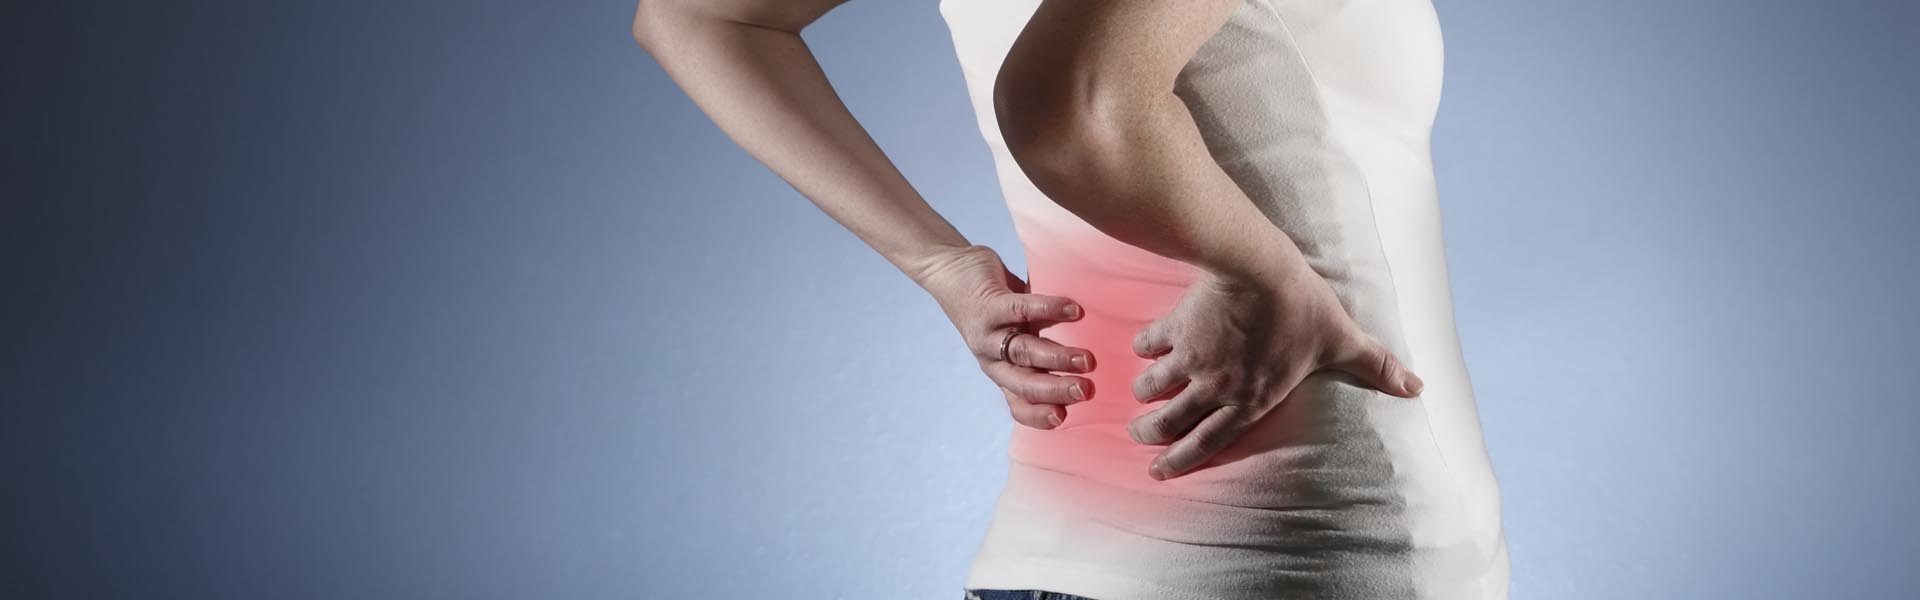 Chiropractor St. Louis, MO | Accident and Pain Relief of St. Louis